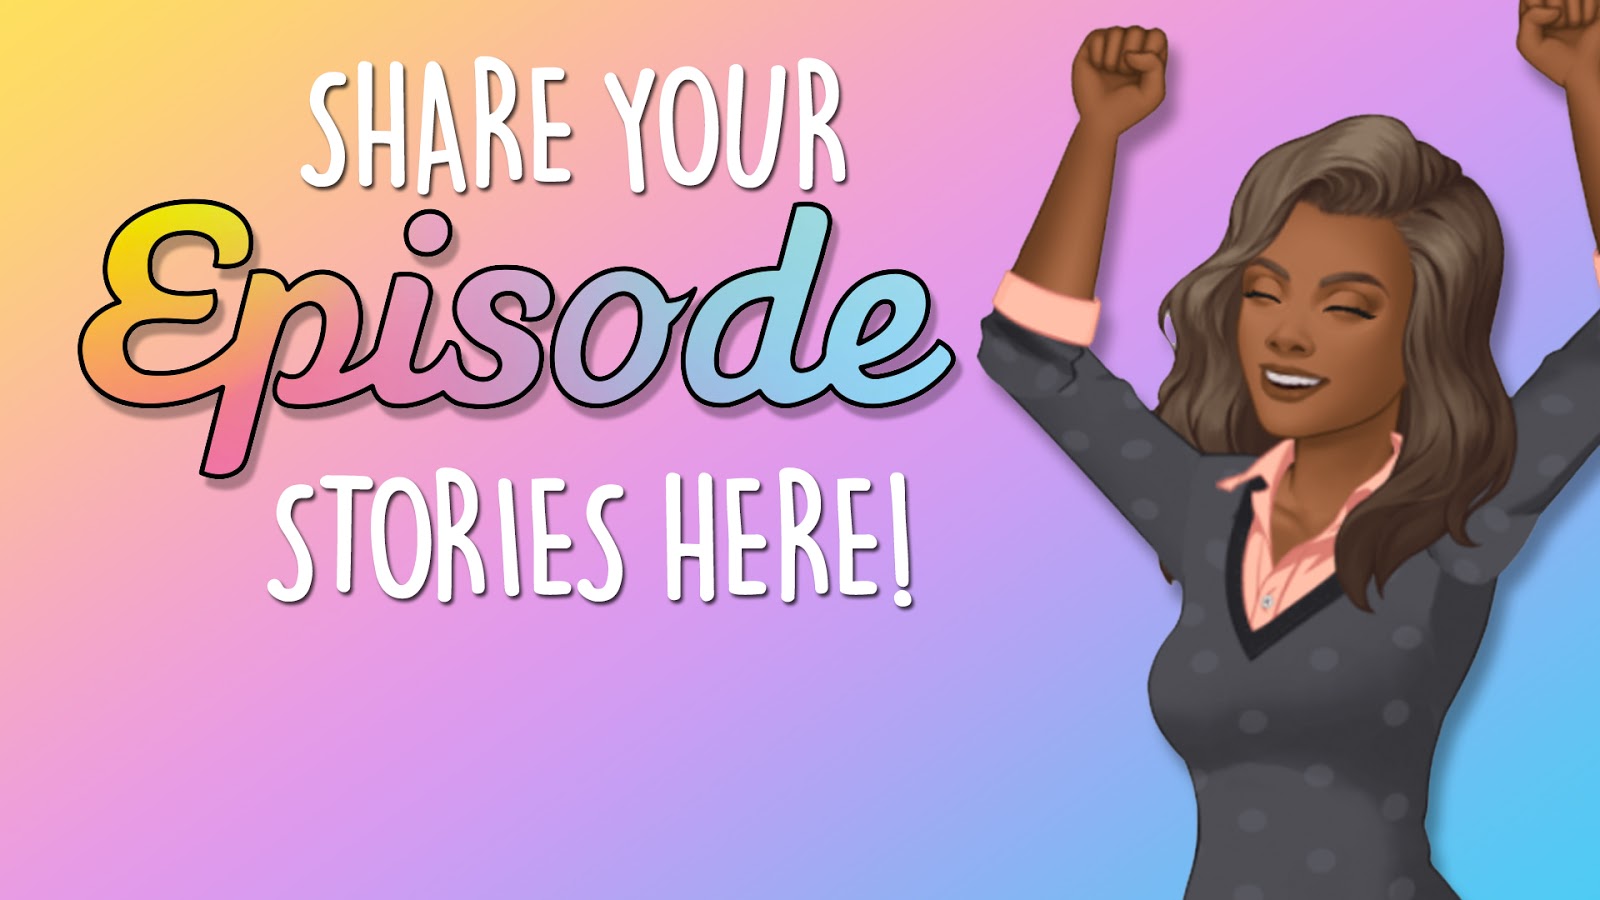 Share Your Episode Stories Here!